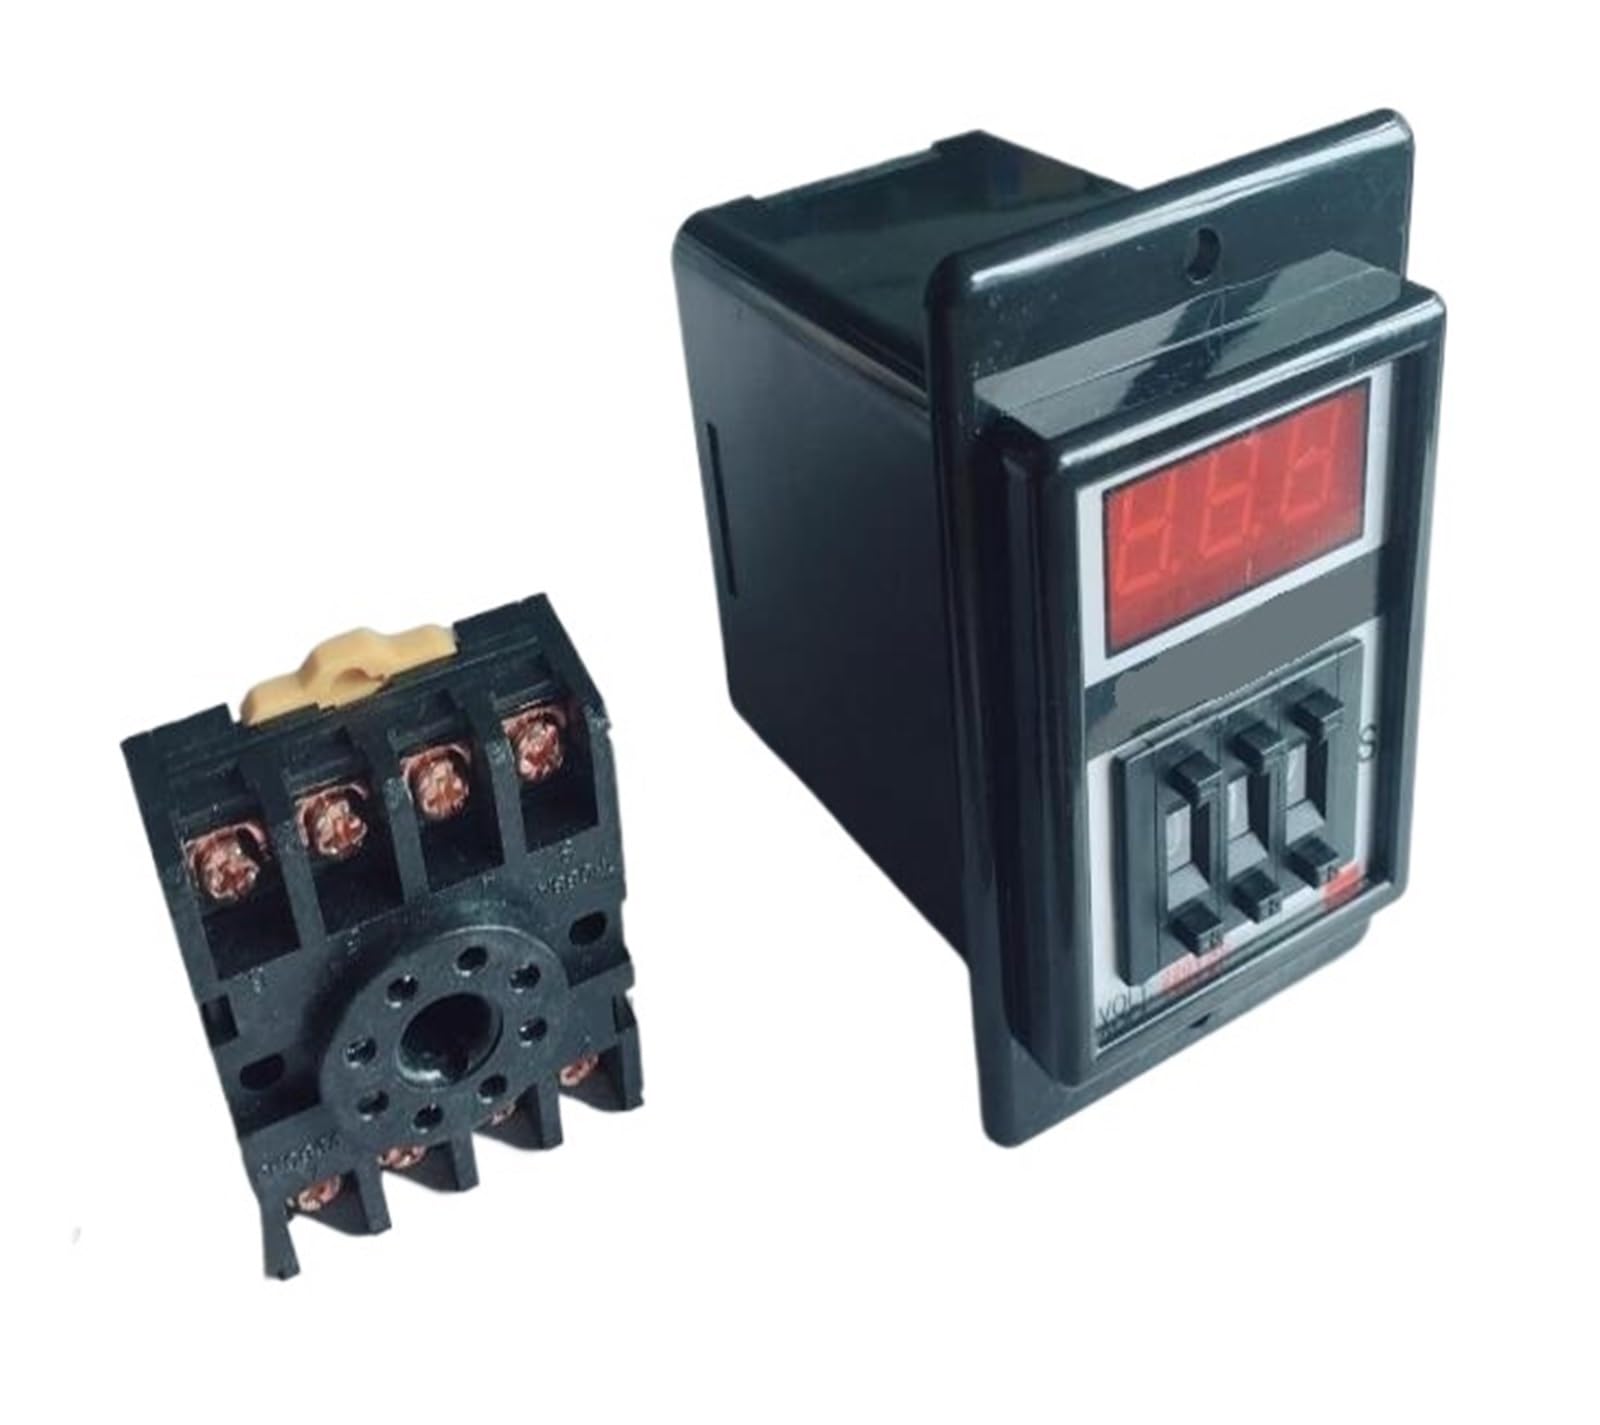 1-99S 1-9.9S 1-99M digits programmable timer delay relay ASY-2D Delay Timer Time Relay 8PIN with base ZDVHOMCB(ASY-2D 99S,DC12V) von ZDVHOMCB